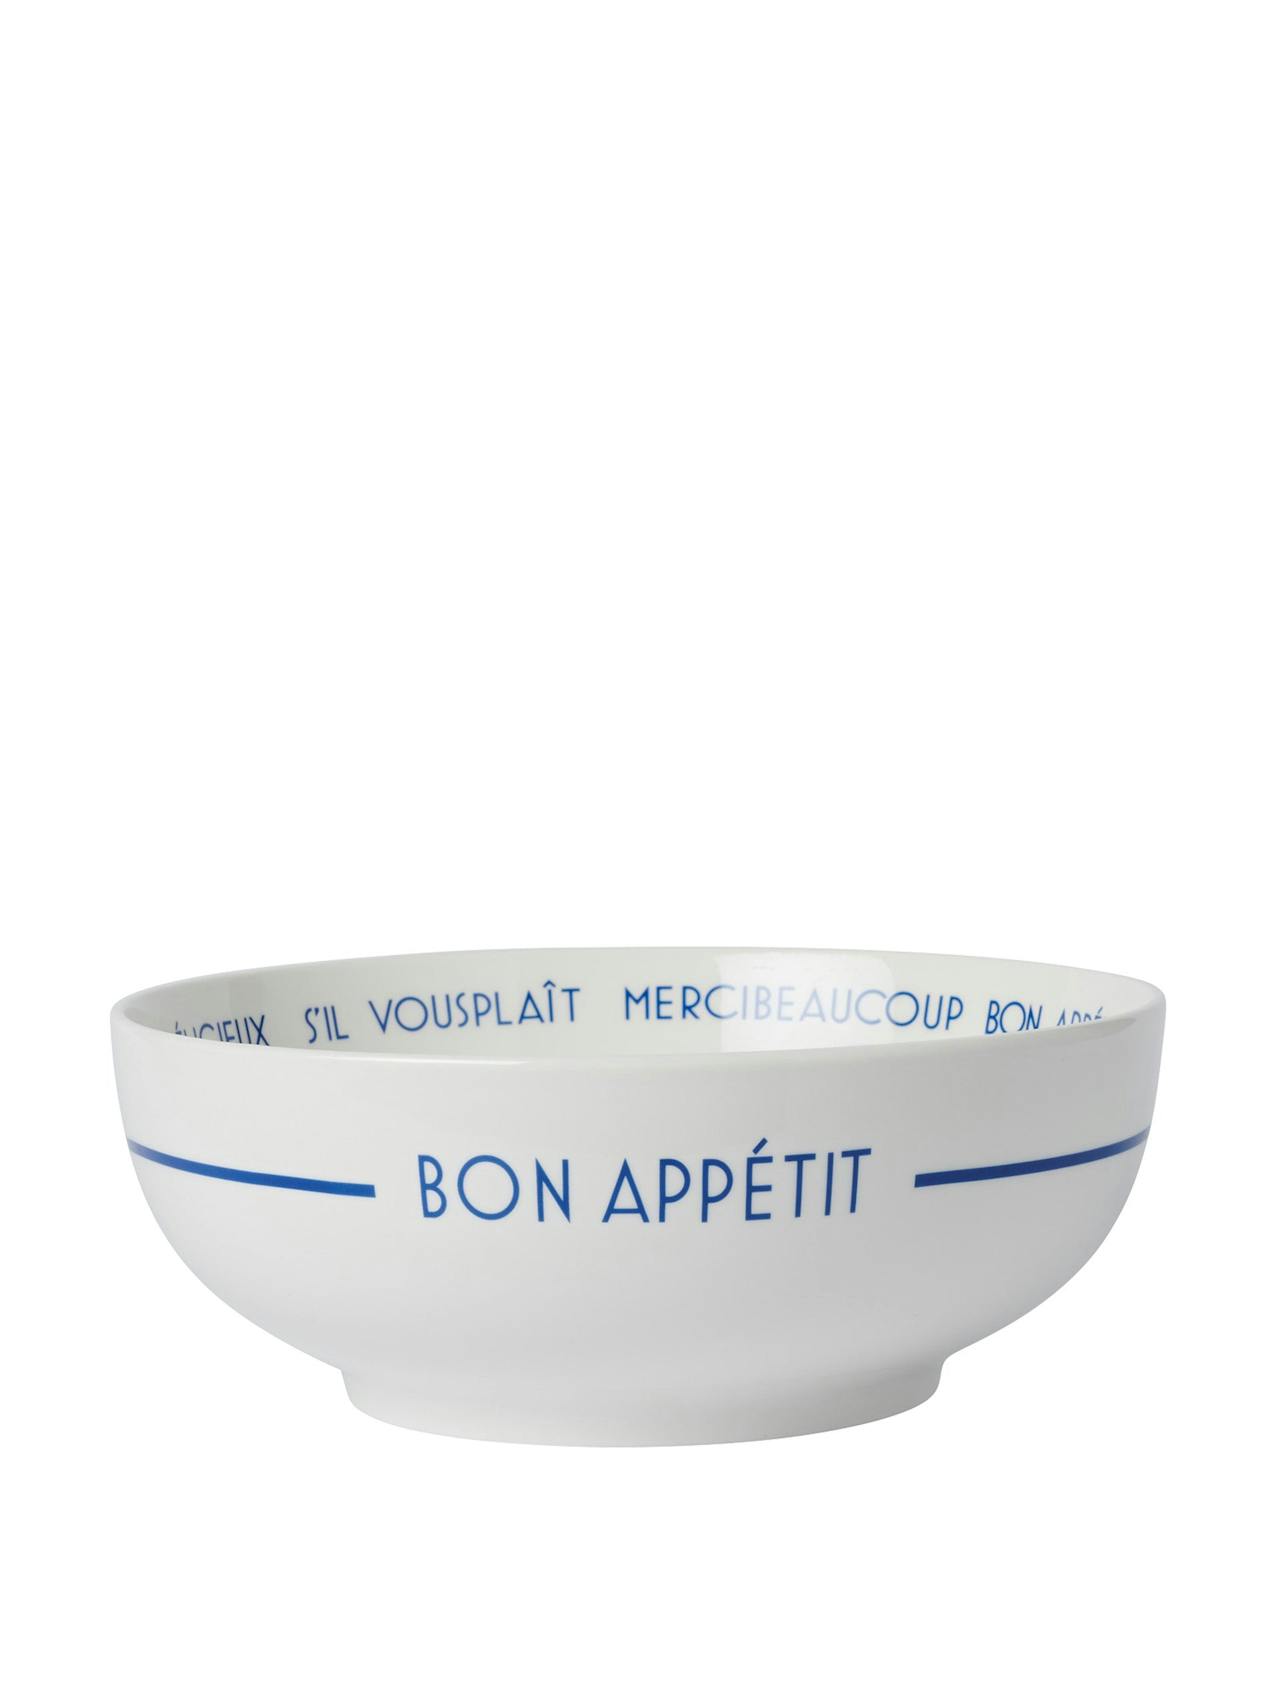 French serving bowl